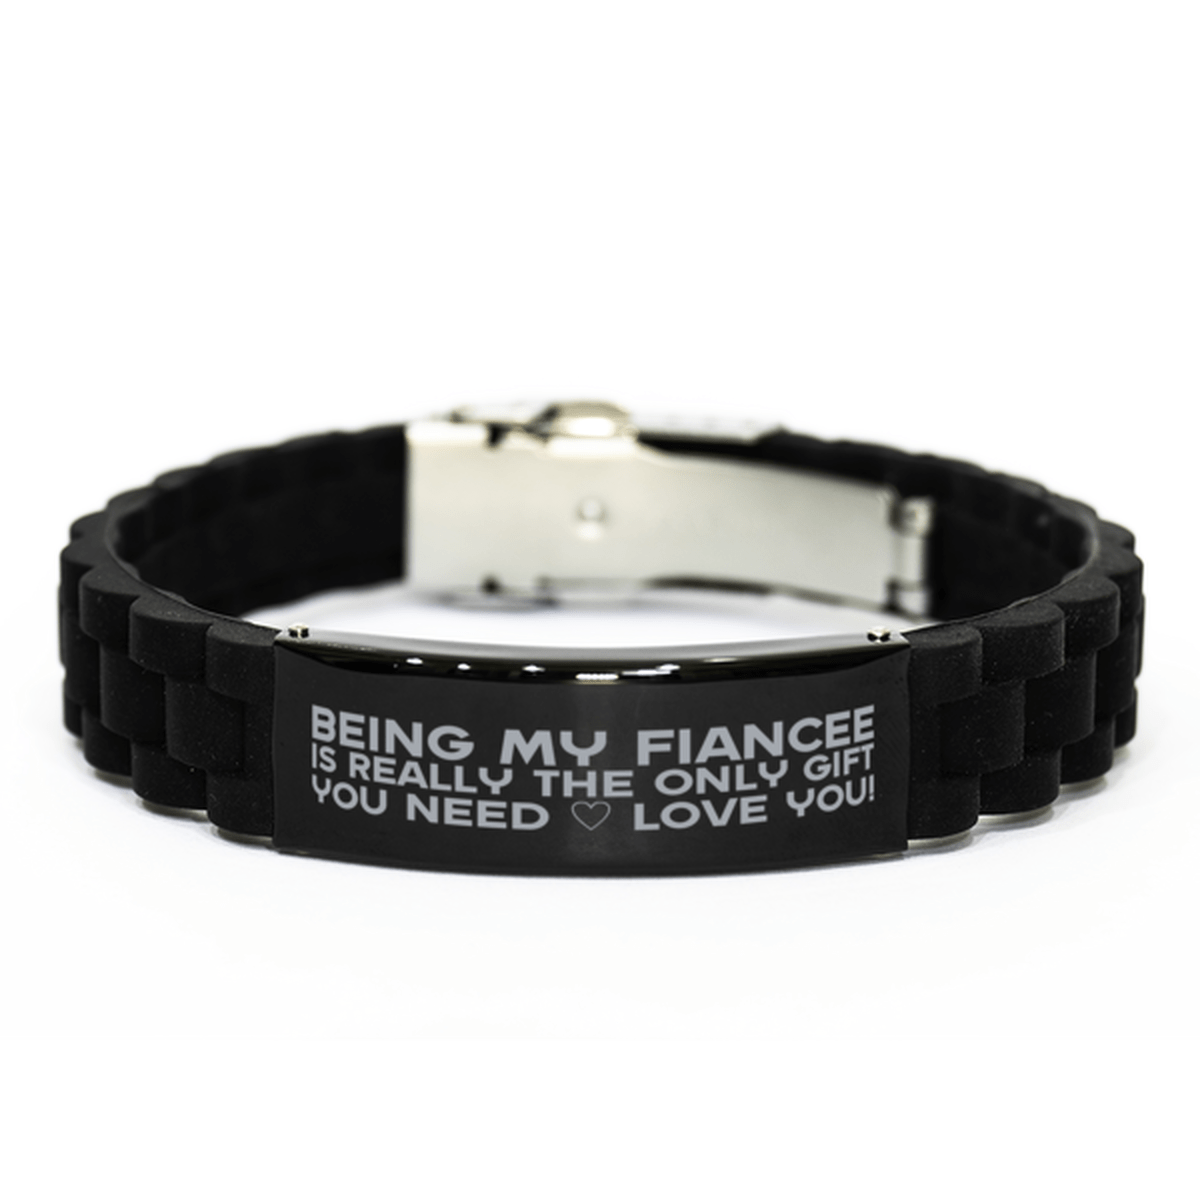 Funny Fiancee Bracelet, Being My Fiancee Is Really the Only Gift You Need, Best Birthday Gifts for Fiancee